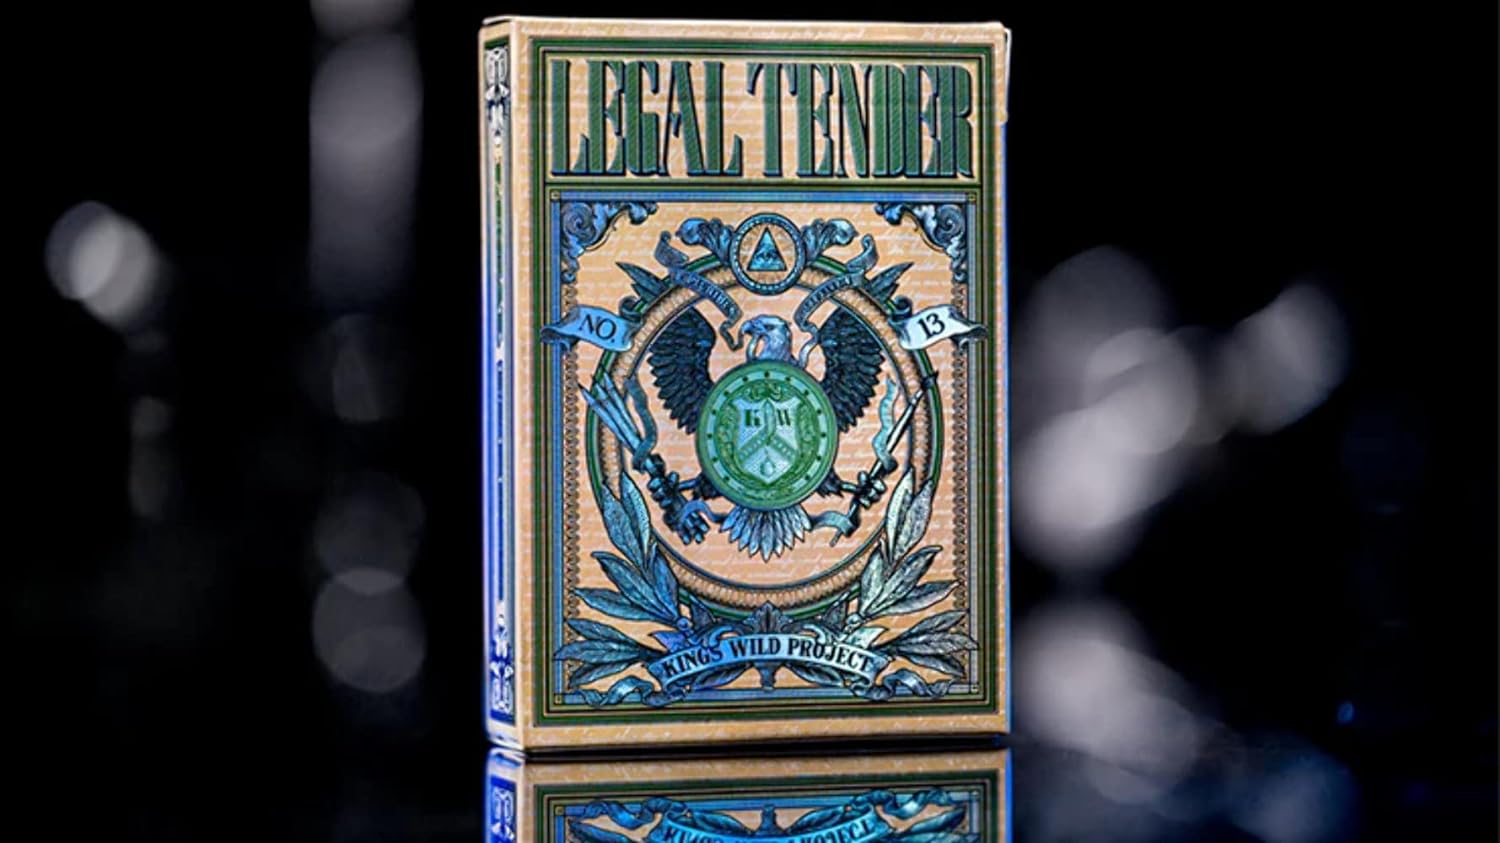 Legal Tender Luxury Playing Cards